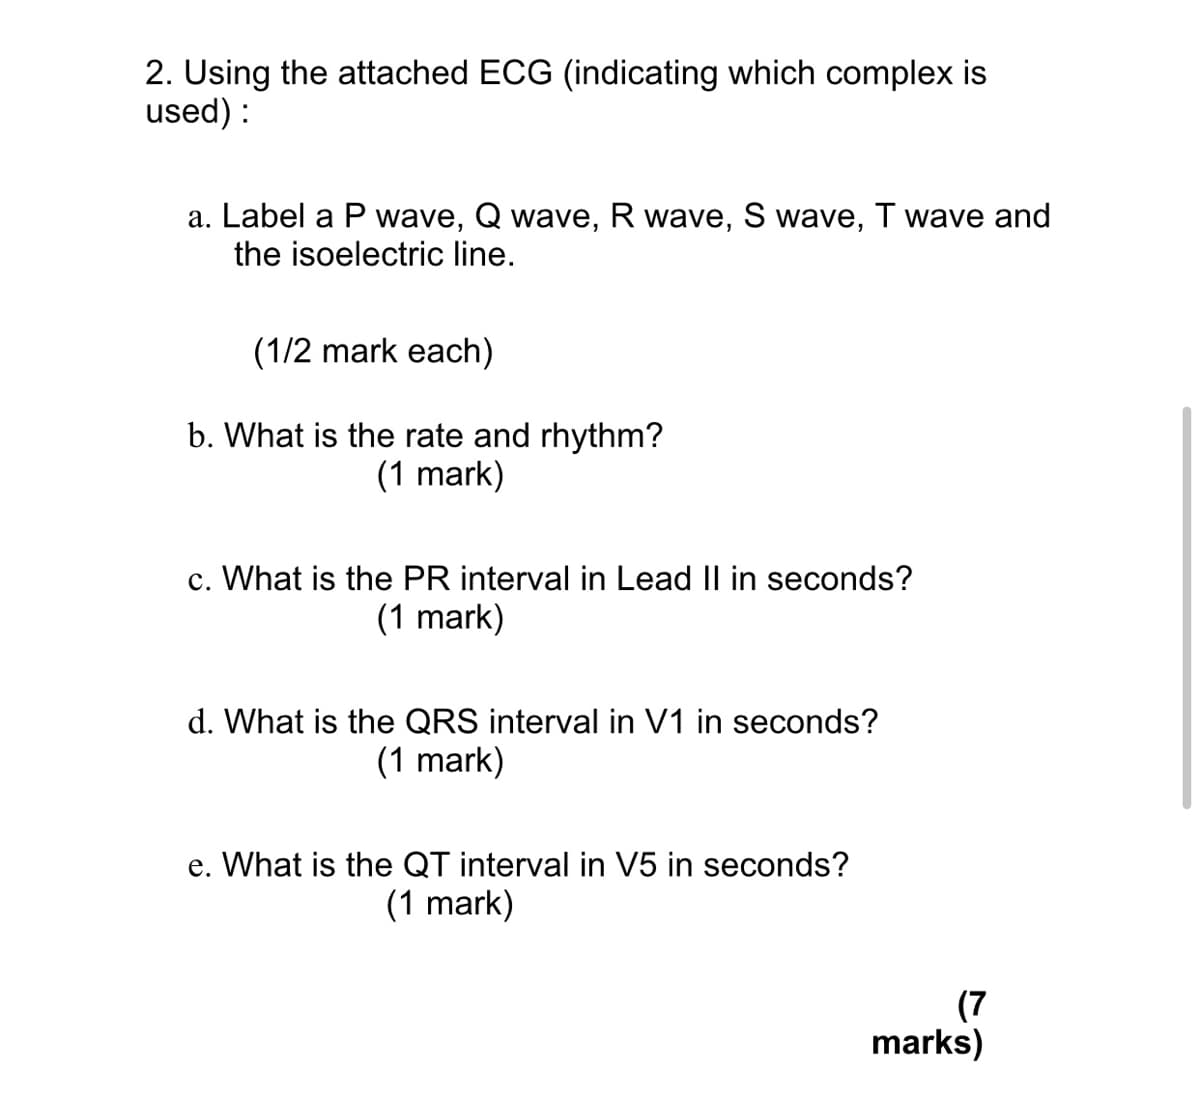 2. Using the attached ECG (indicating which complex is
used):
a. Label a P wave, Q wave, R wave, S wave, T wave and
the isoelectric line.
(1/2 mark each)
b. What is the rate and rhythm?
(1 mark)
c. What is the PR interval in Lead II in seconds?
(1 mark)
d. What is the QRS interval in V1 in seconds?
(1 mark)
e. What is the QT interval in V5 in seconds?
(1 mark)
(7
marks)